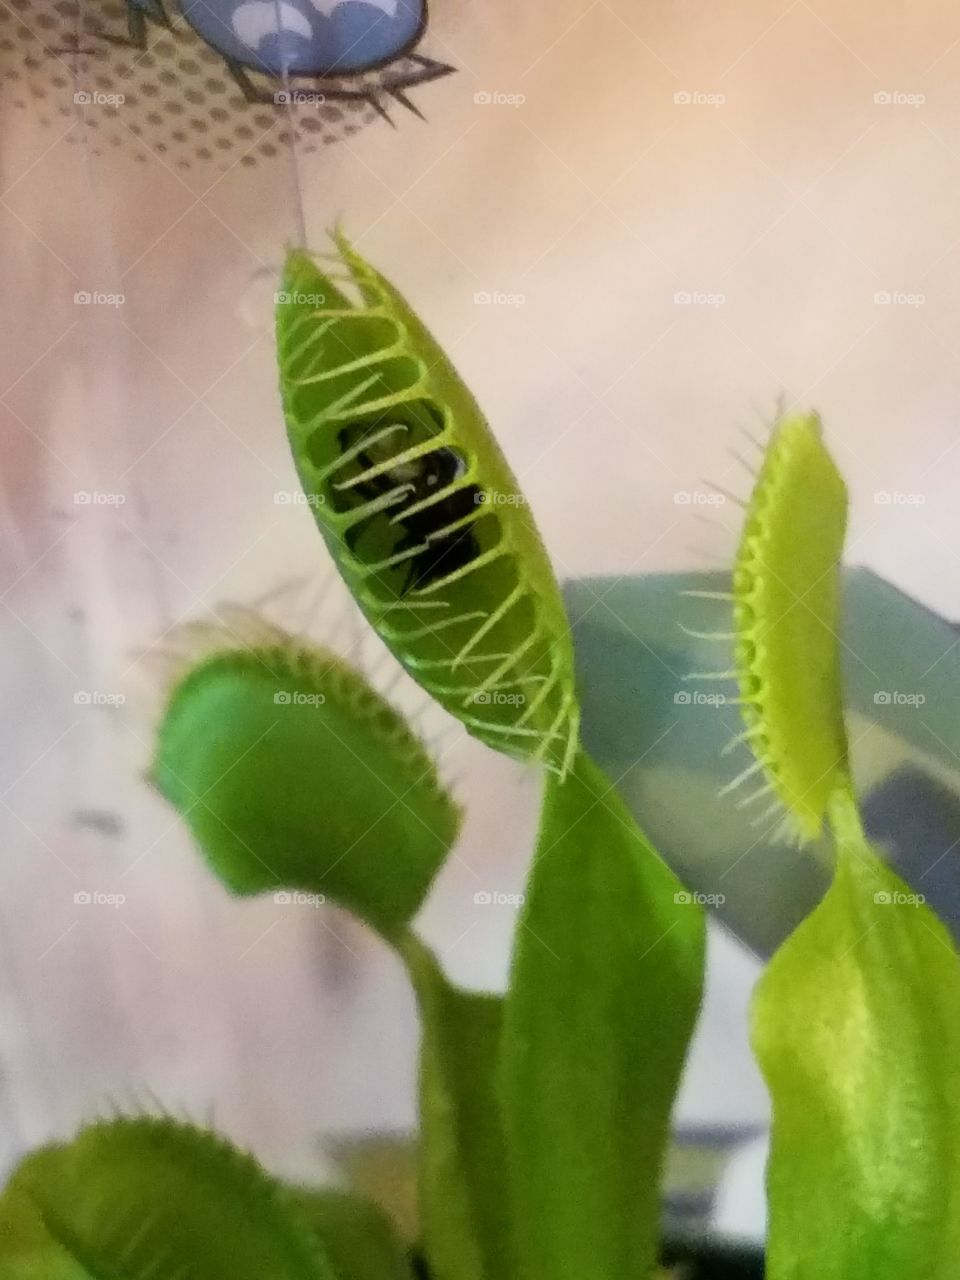 Venus Fly Trap enjoying it's fly that landed right into the pod.